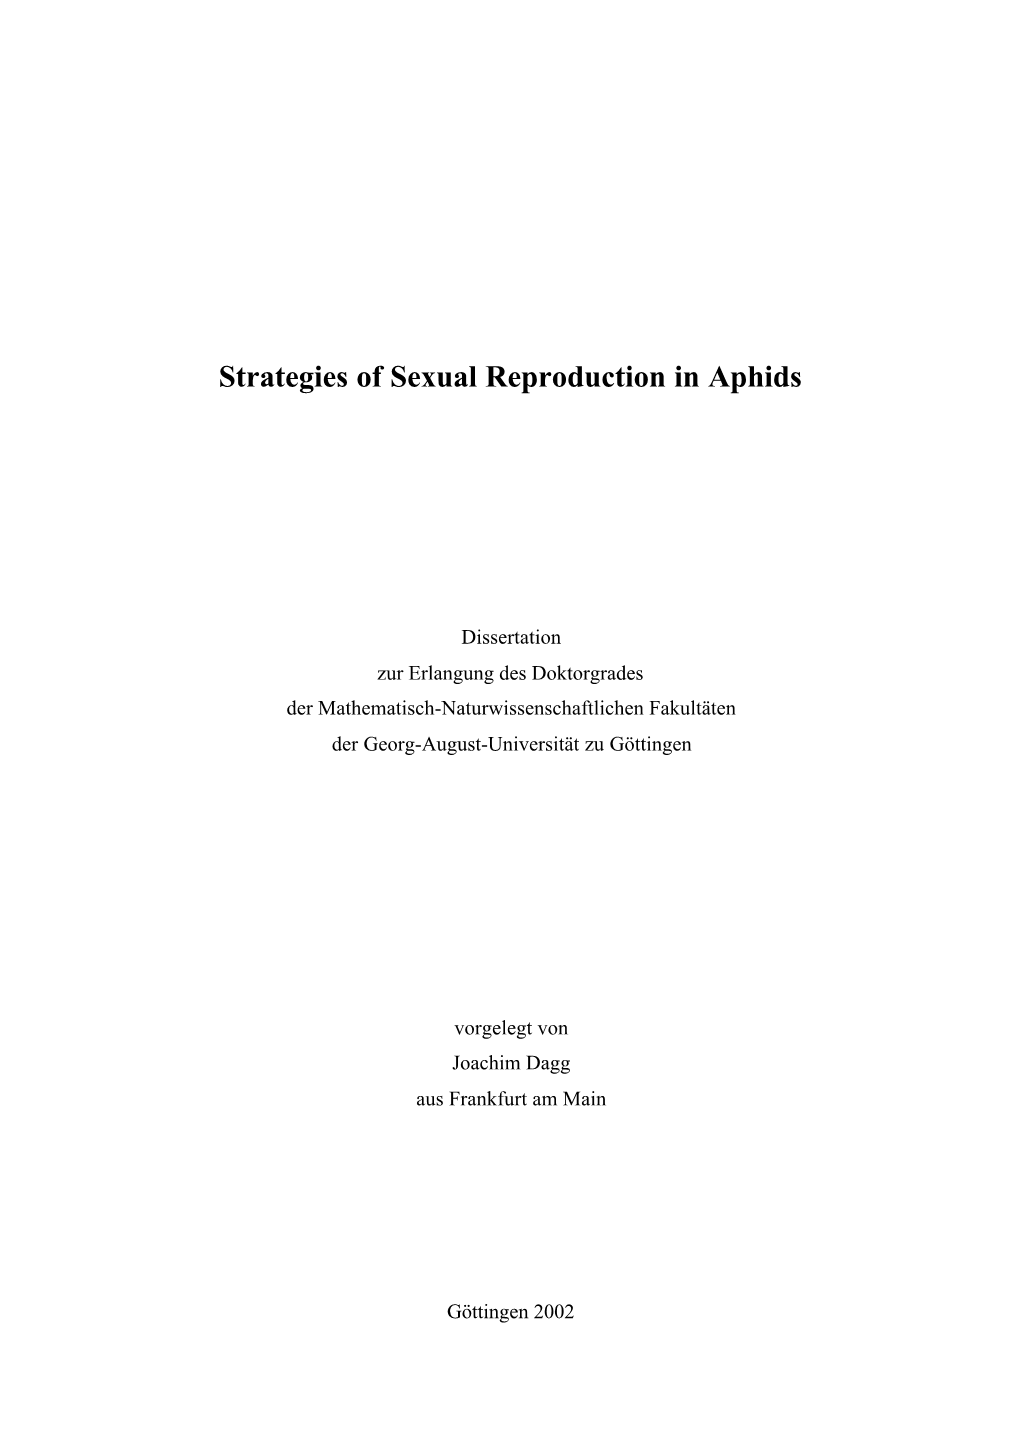 Strategies of Sexual Reproduction in Aphids